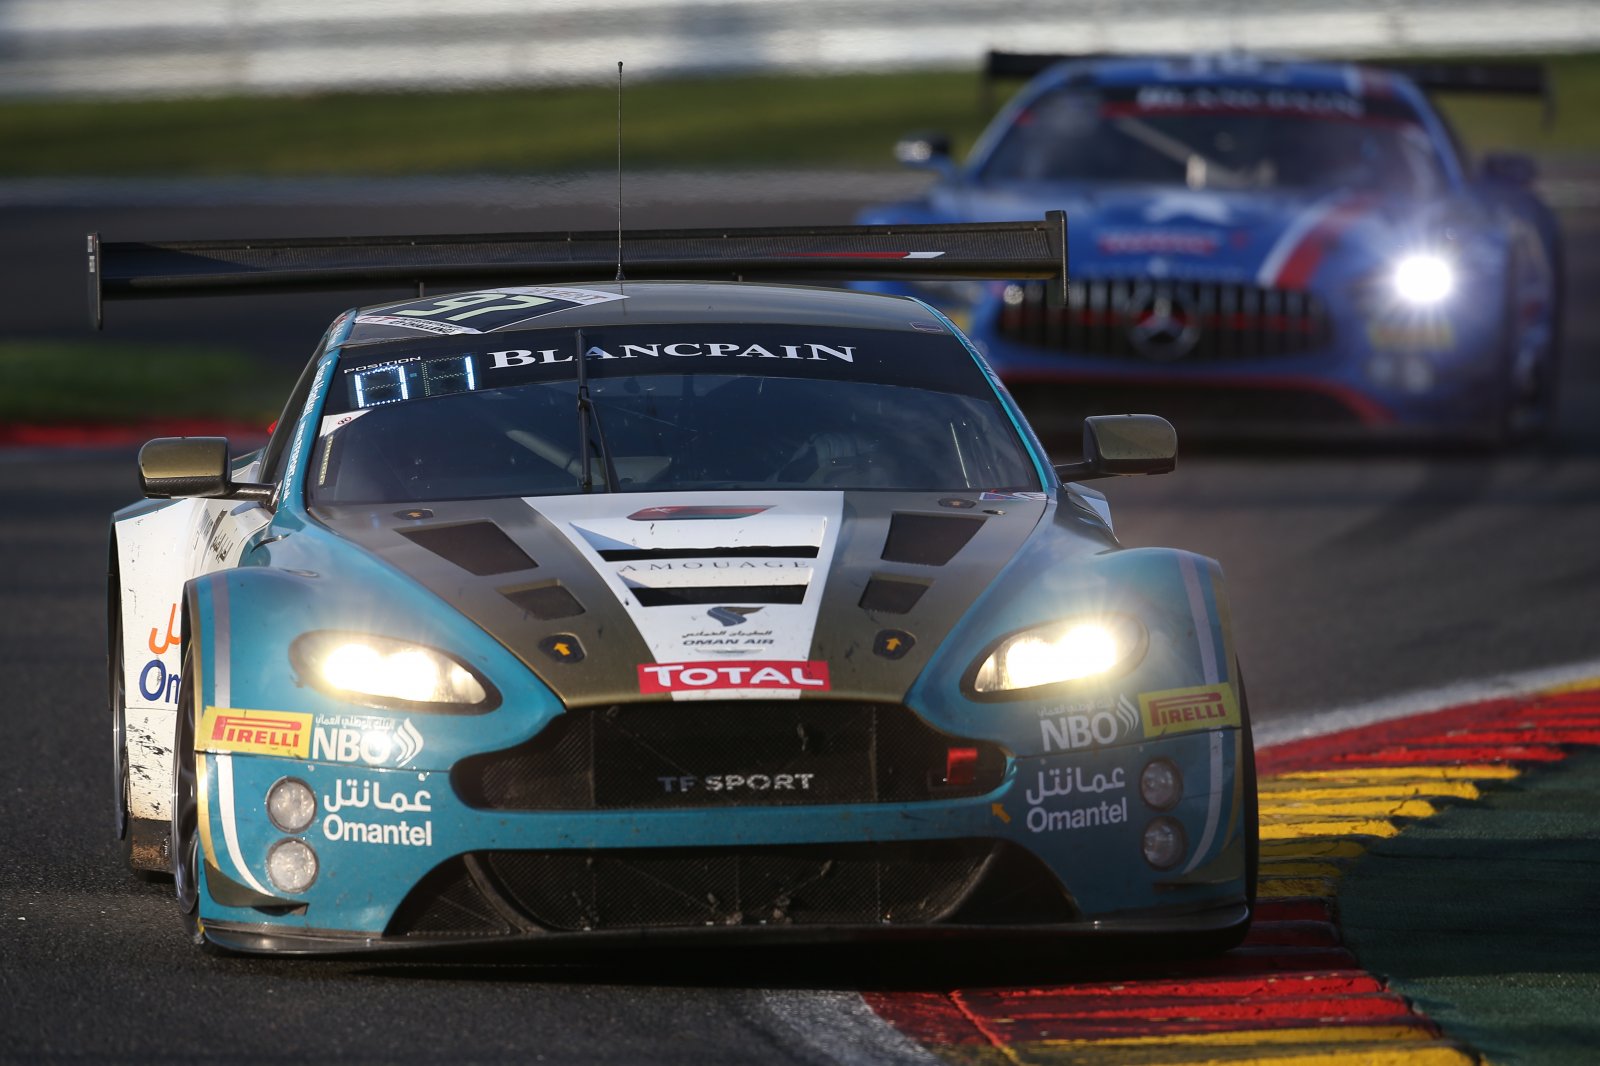 Oman Racing Team with TF Sport in Total 24 Hours of Spa